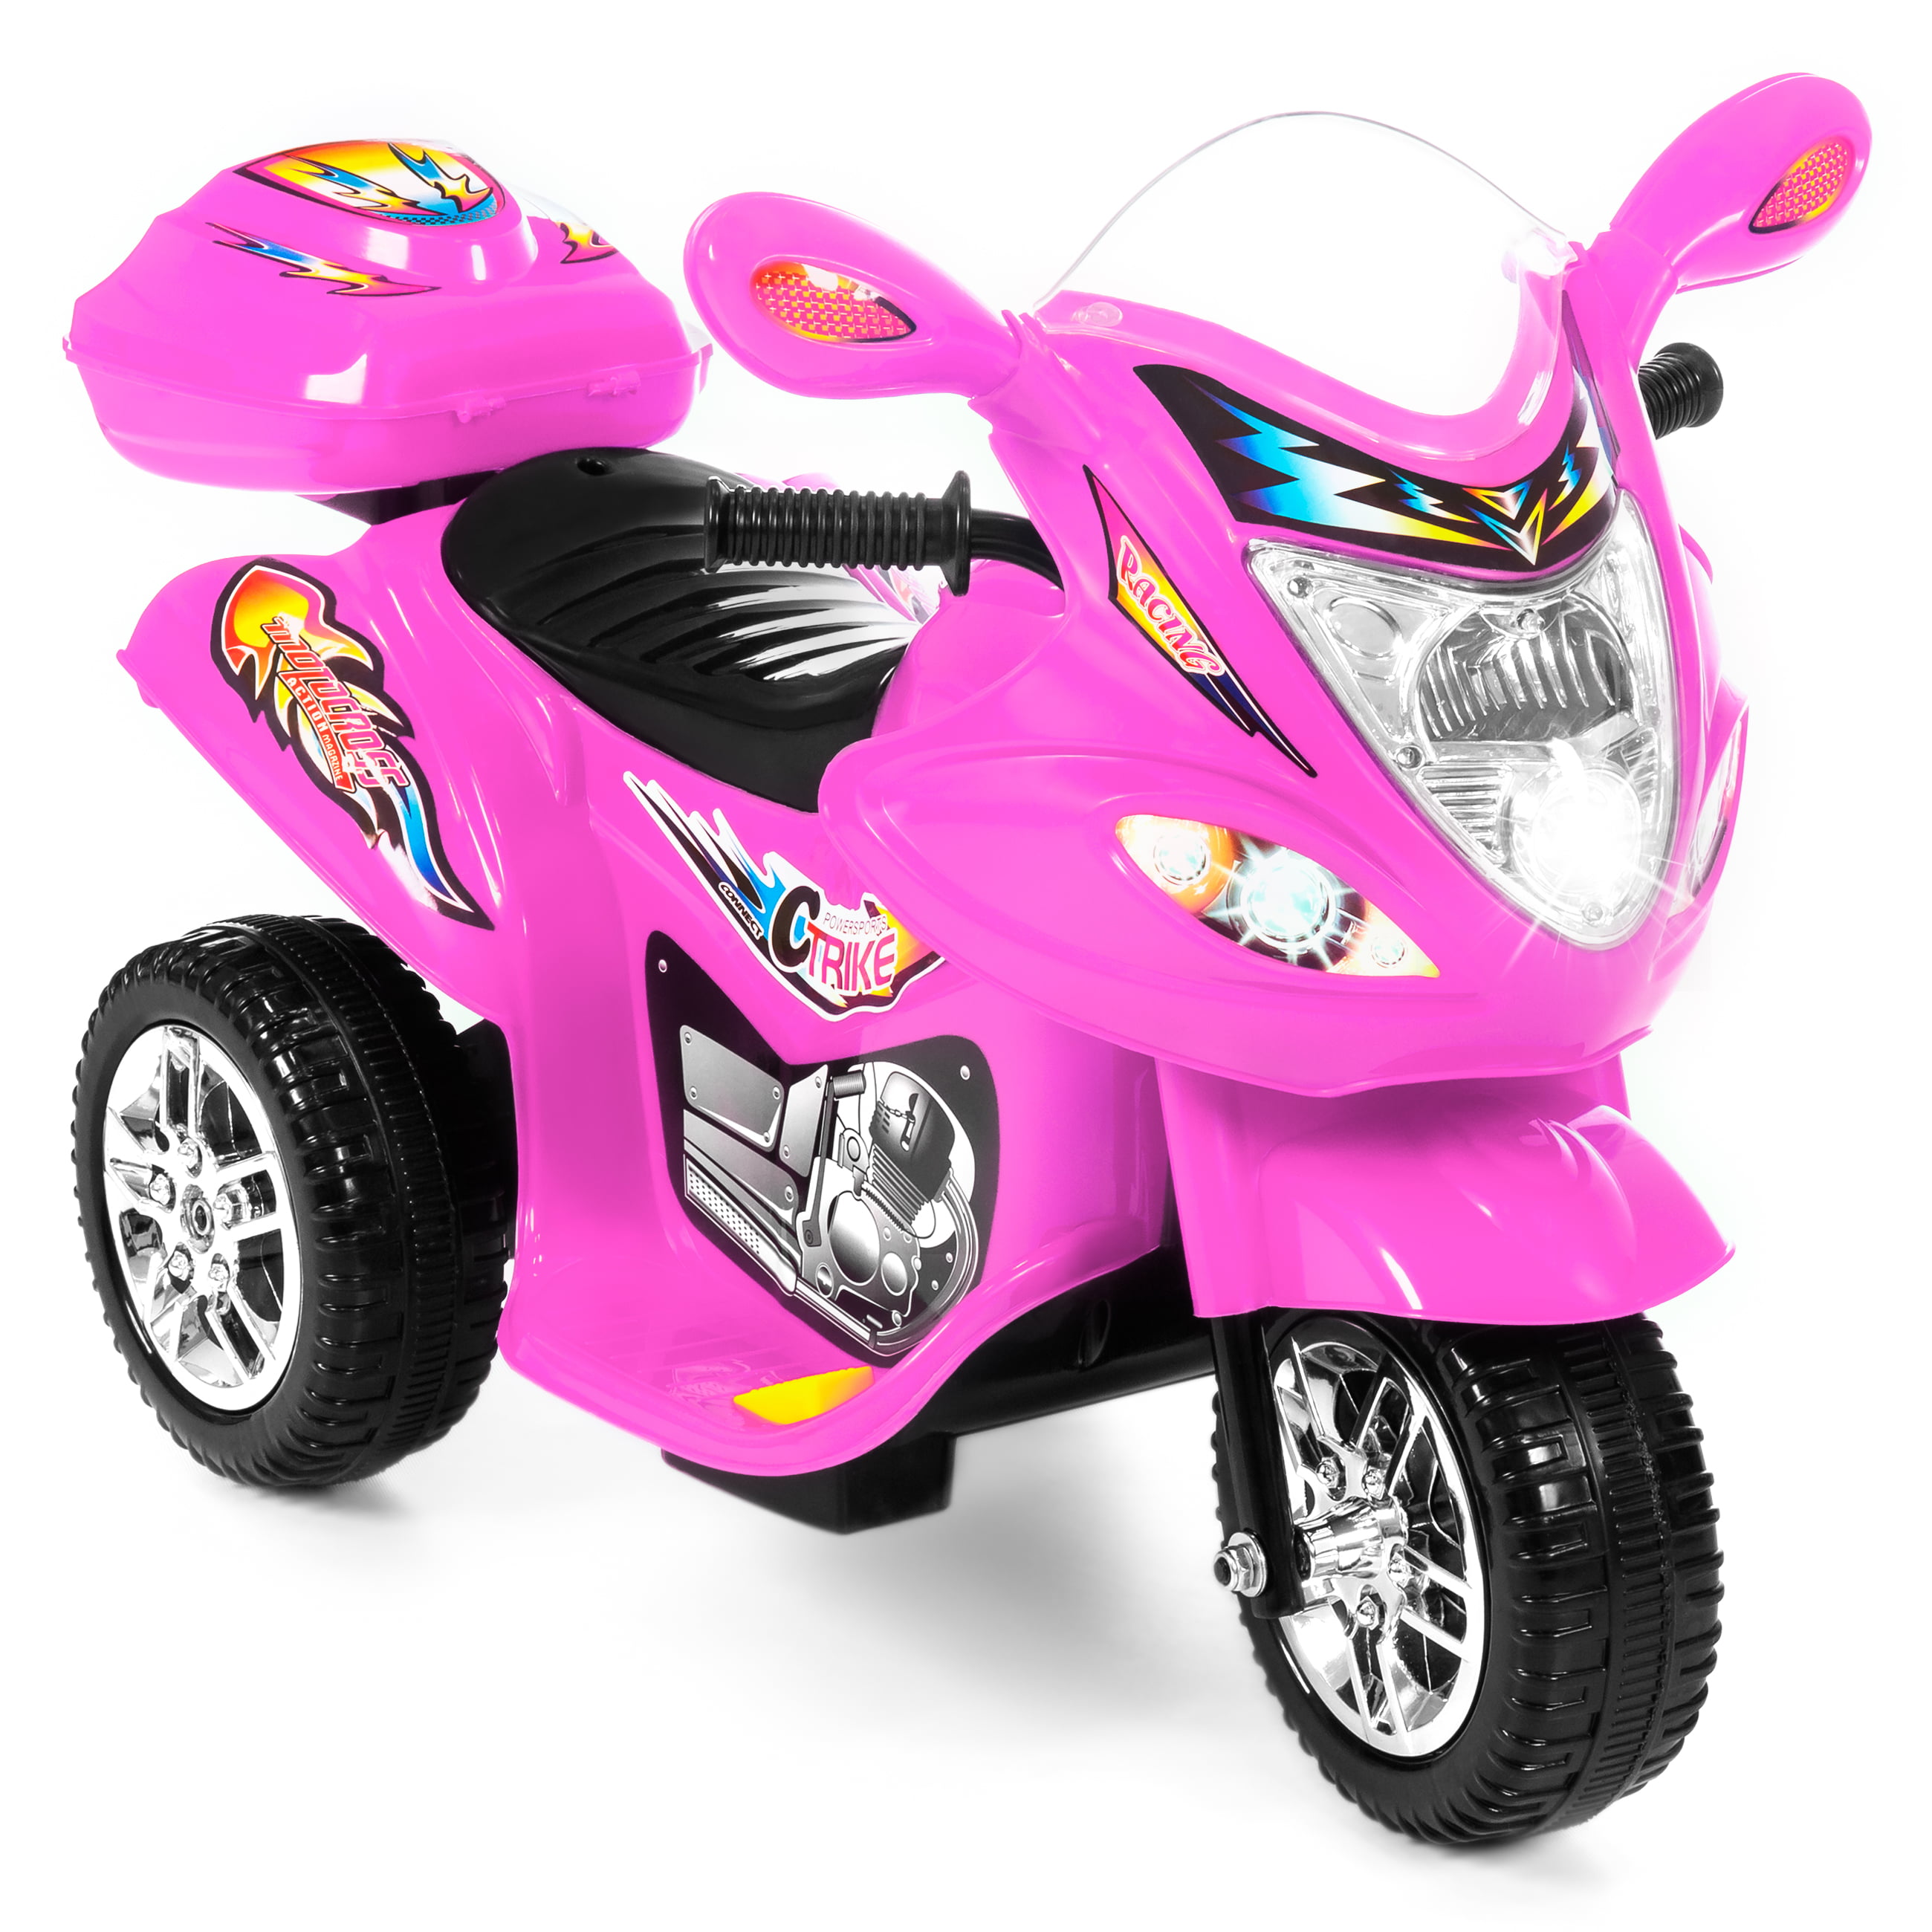 Best Choice Products 6V Kids Battery Powered 3-Wheel Motorcycle Ride On Toy w/ LED Lights, Music